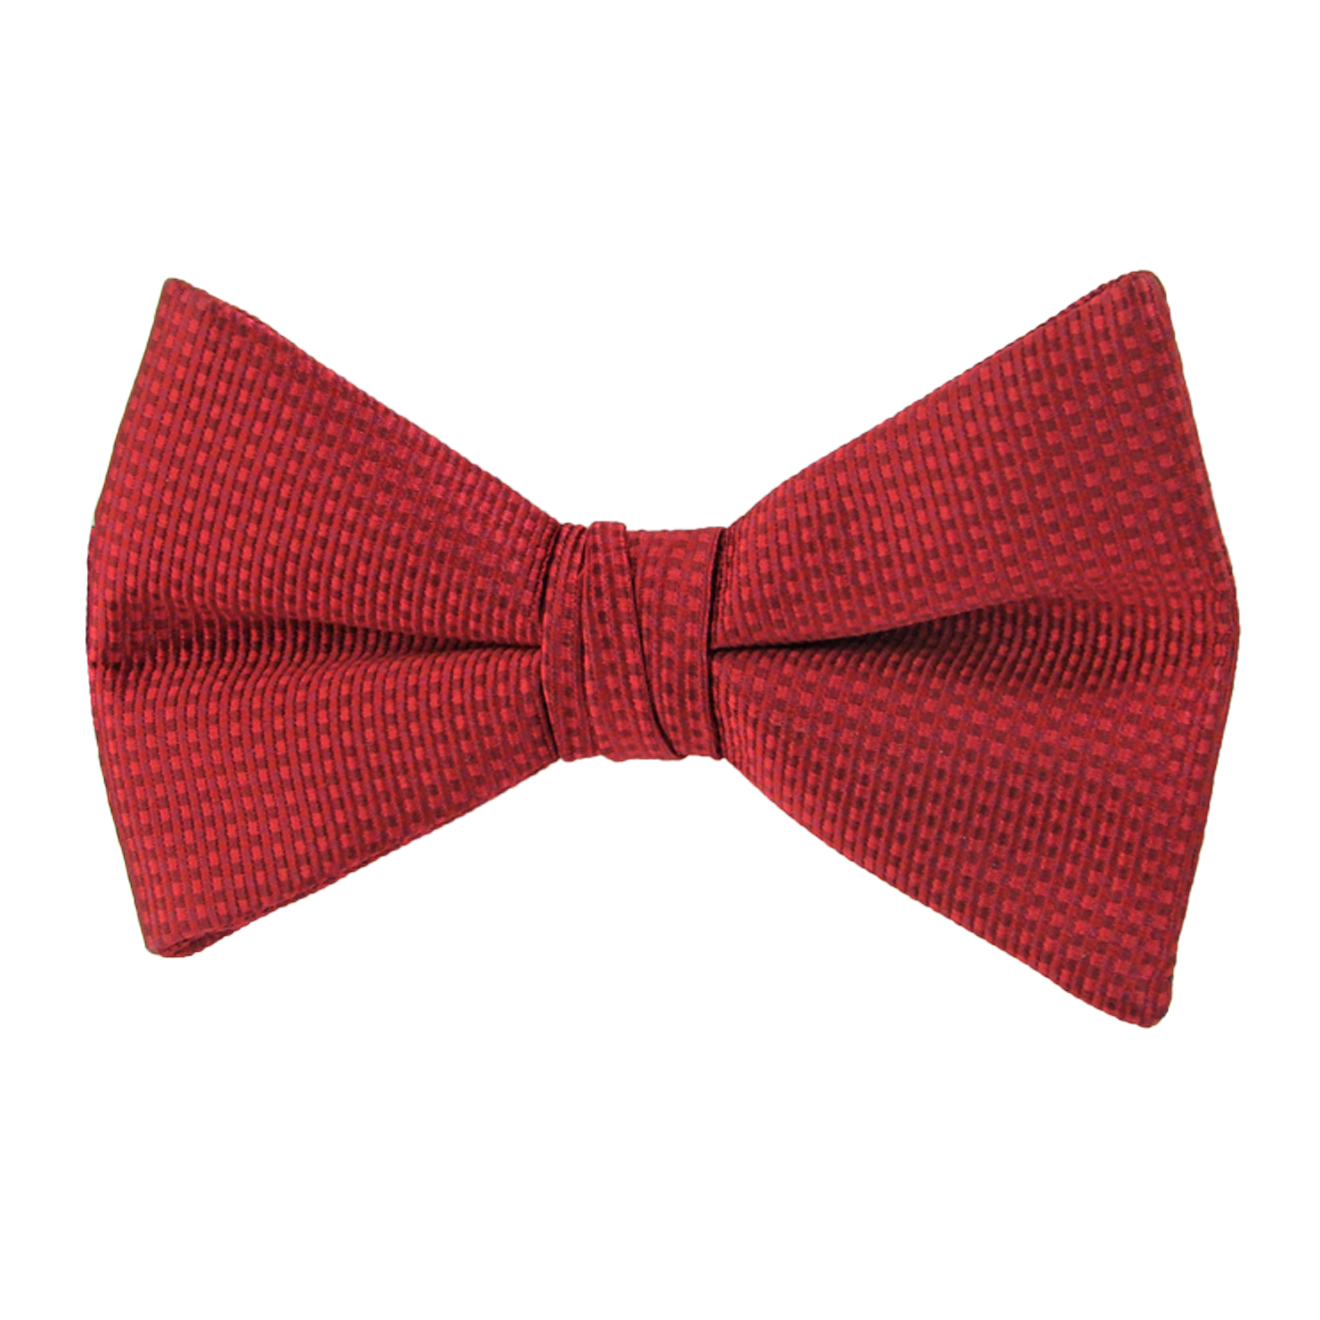 Red Tie PNG Free File Download